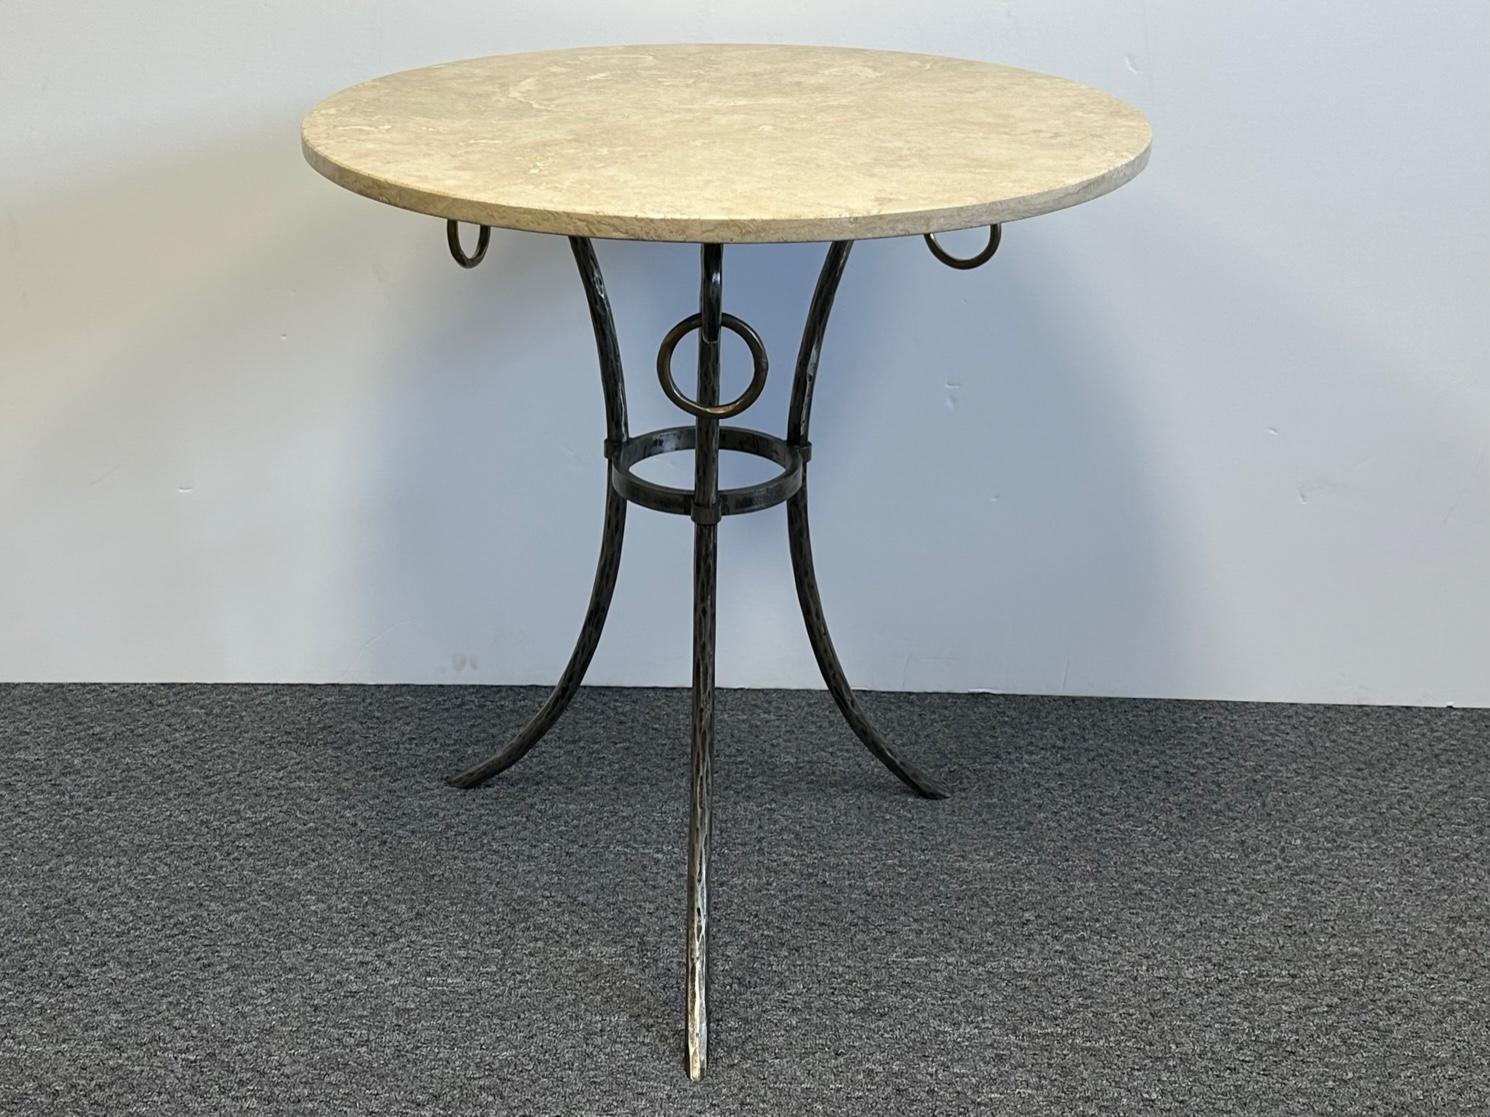 Stunning timeless design in this Italian hammered steel Gueridon round table having removeable brass rings and cream marble top.